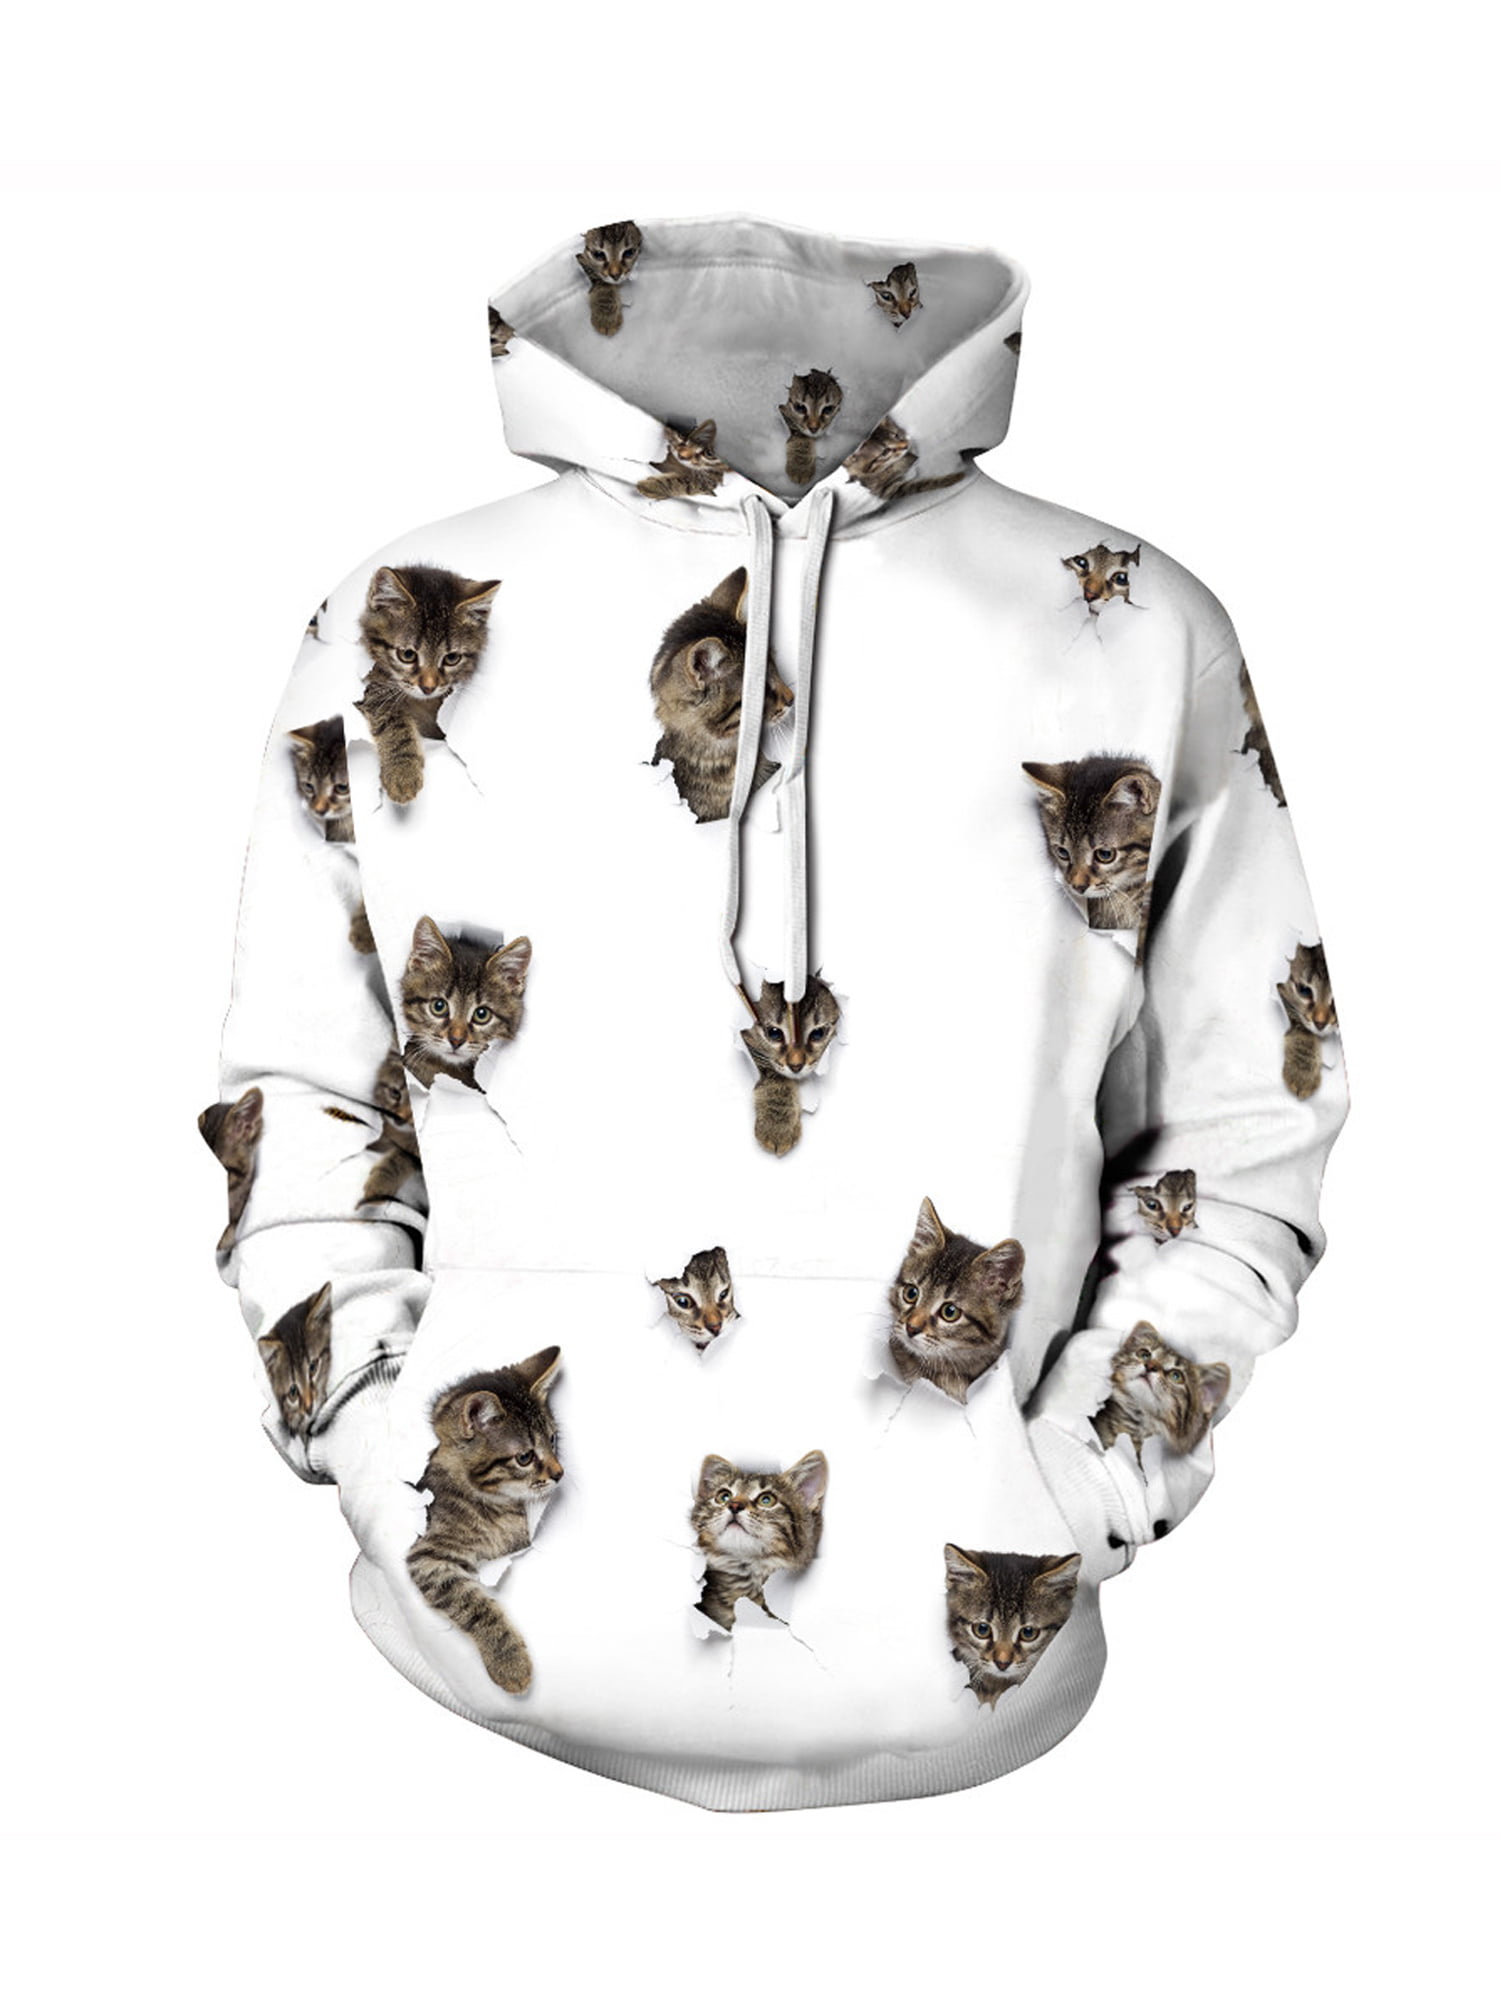 Space Galaxy Cat Mens Front Pouch Pocket Pullover Hoodie Sweatshirt Long Sleeves Pullover Tops